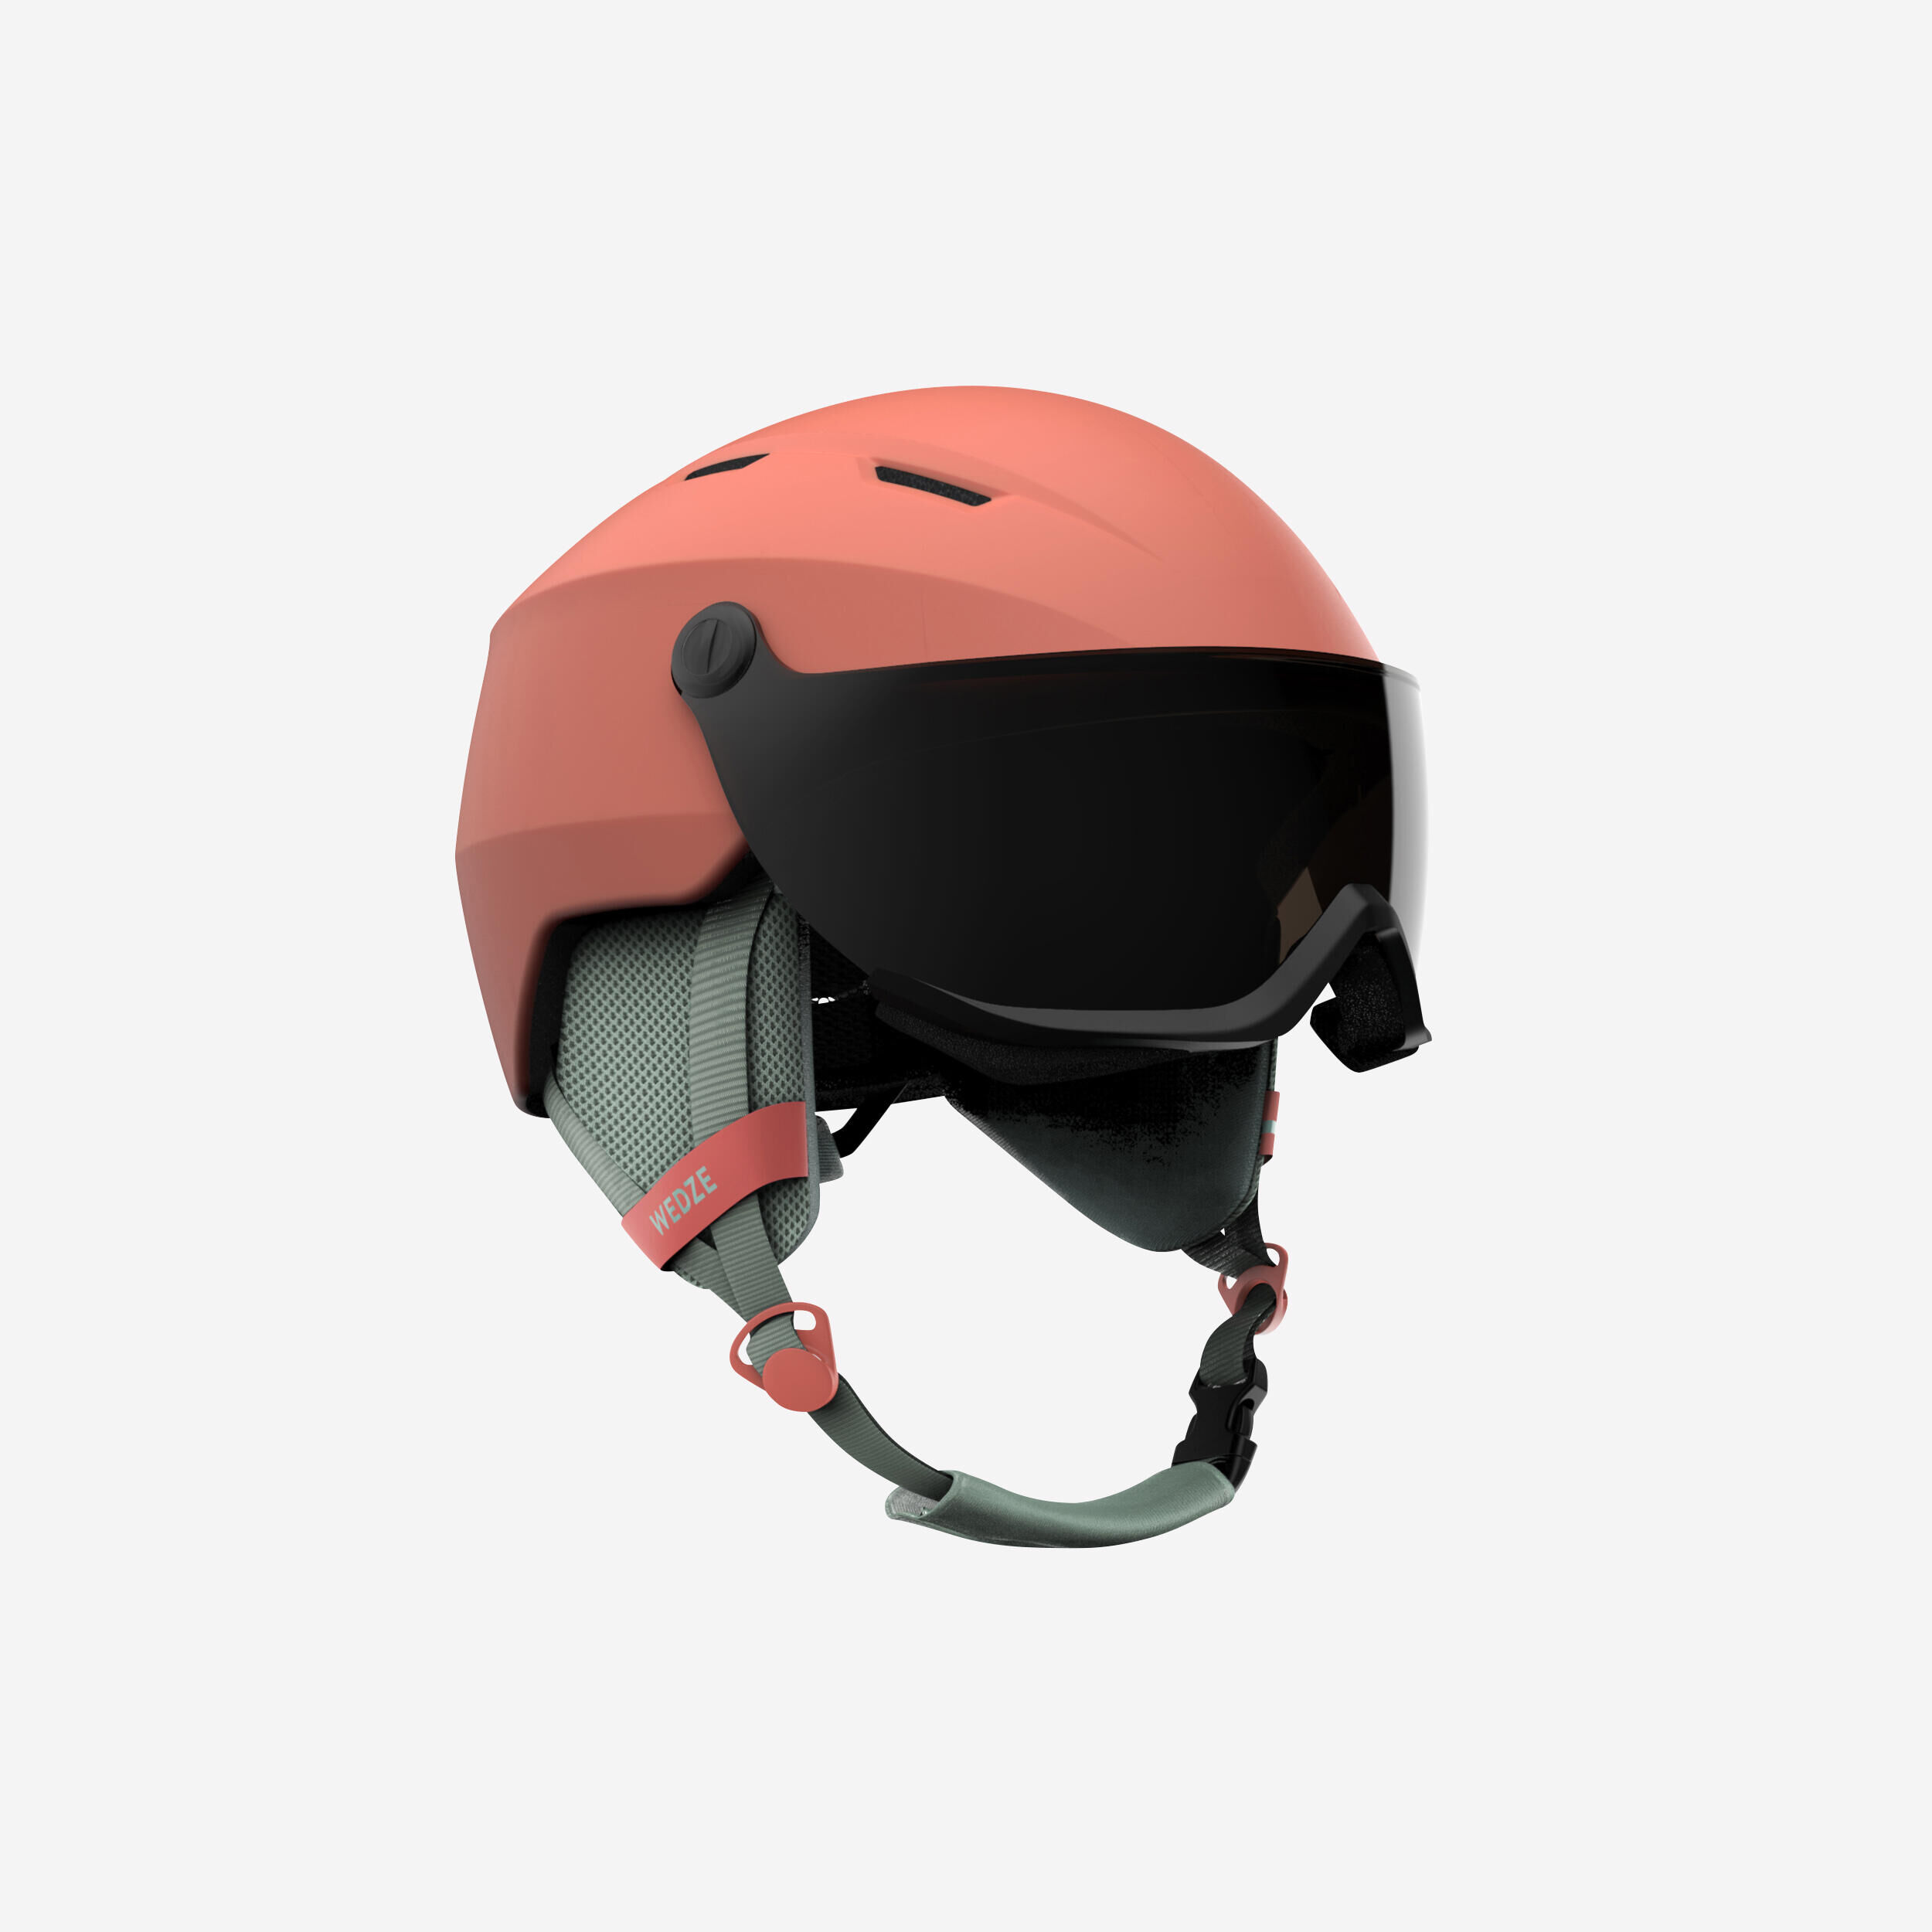 WEDZE ADULTS' DOWNHILL SKI HELMET WITH VISOR H350 - CORAL